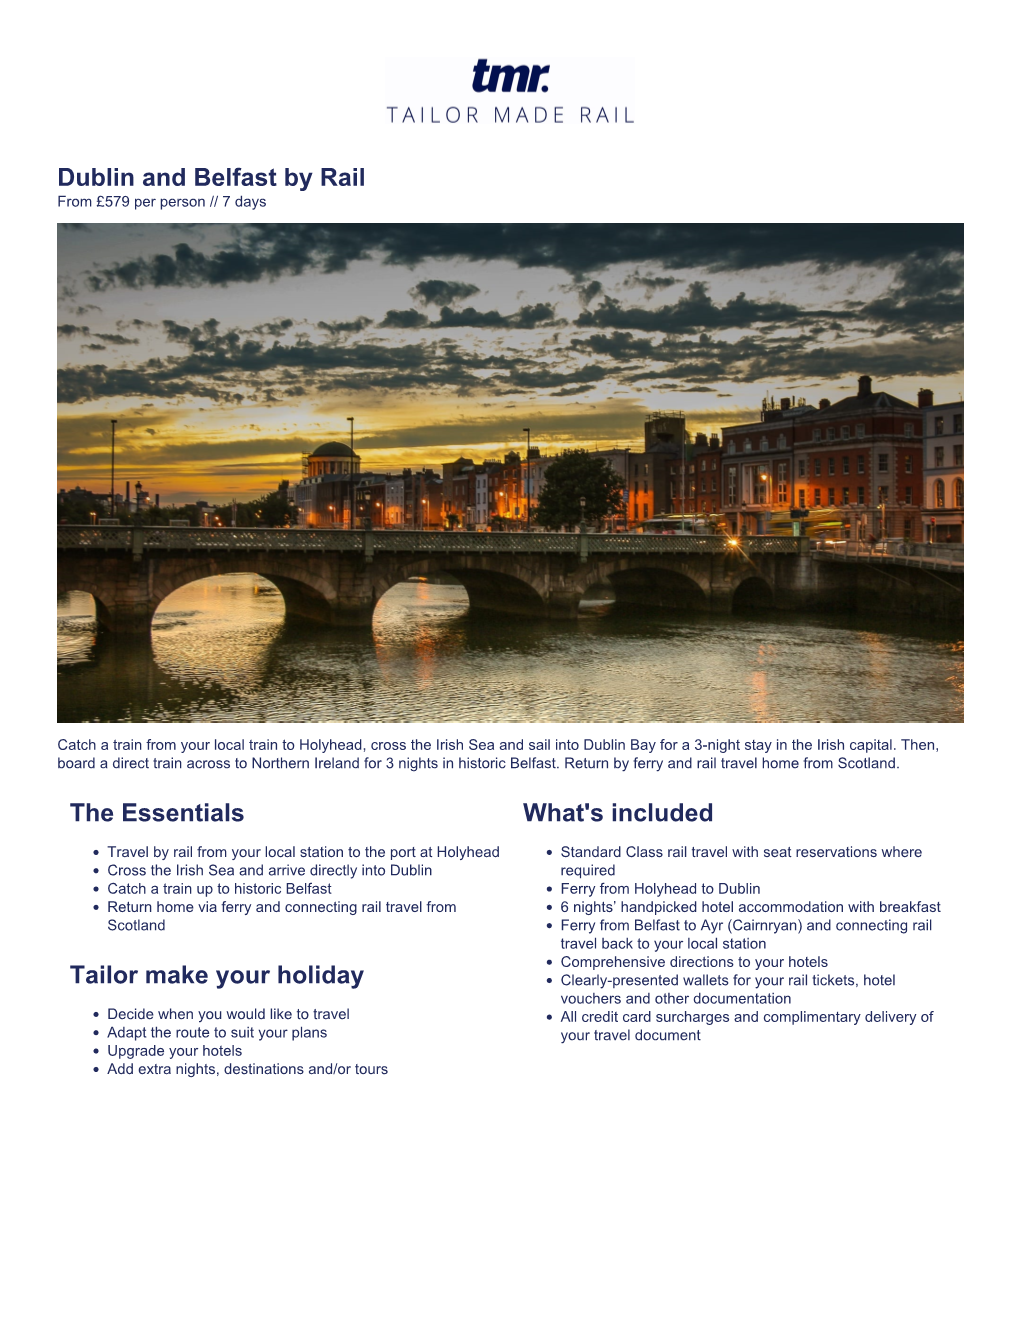 Dublin and Belfast by Rail from £579 Per Person // 7 Days